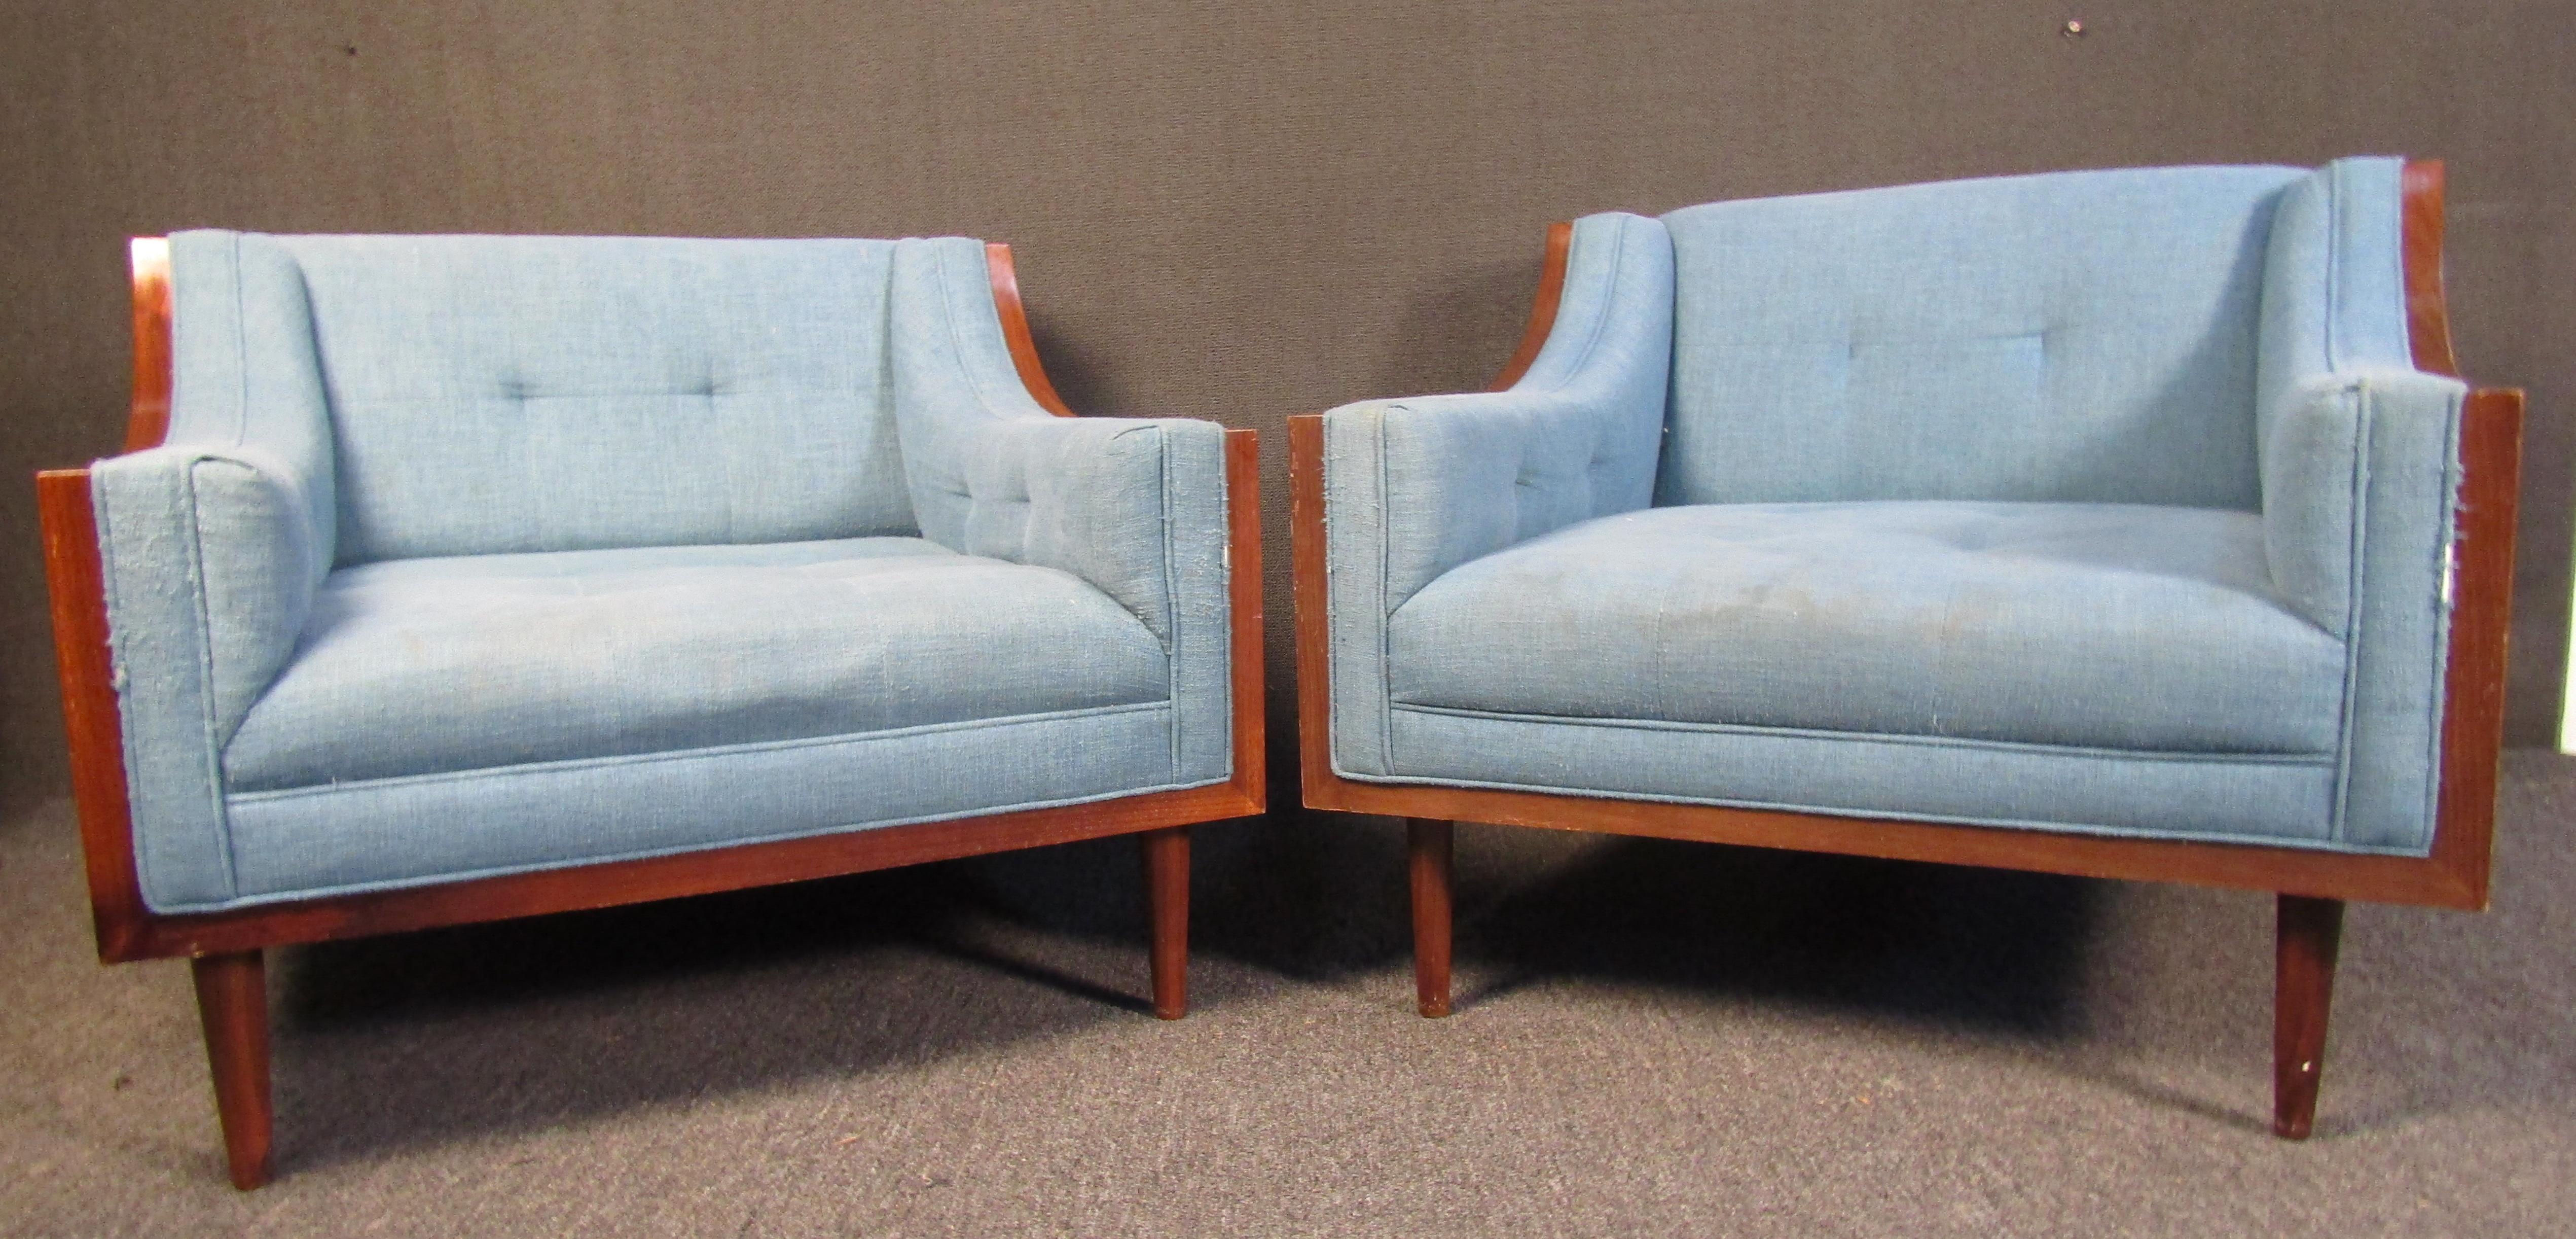 Set of two vintage modern lounge chairs. The chairs are upholstered in a light baby blue colored fabric, set within deep richly colored walnut shells on tapered legs. These classy and studious looking lounge chairs would make a beautiful addition to